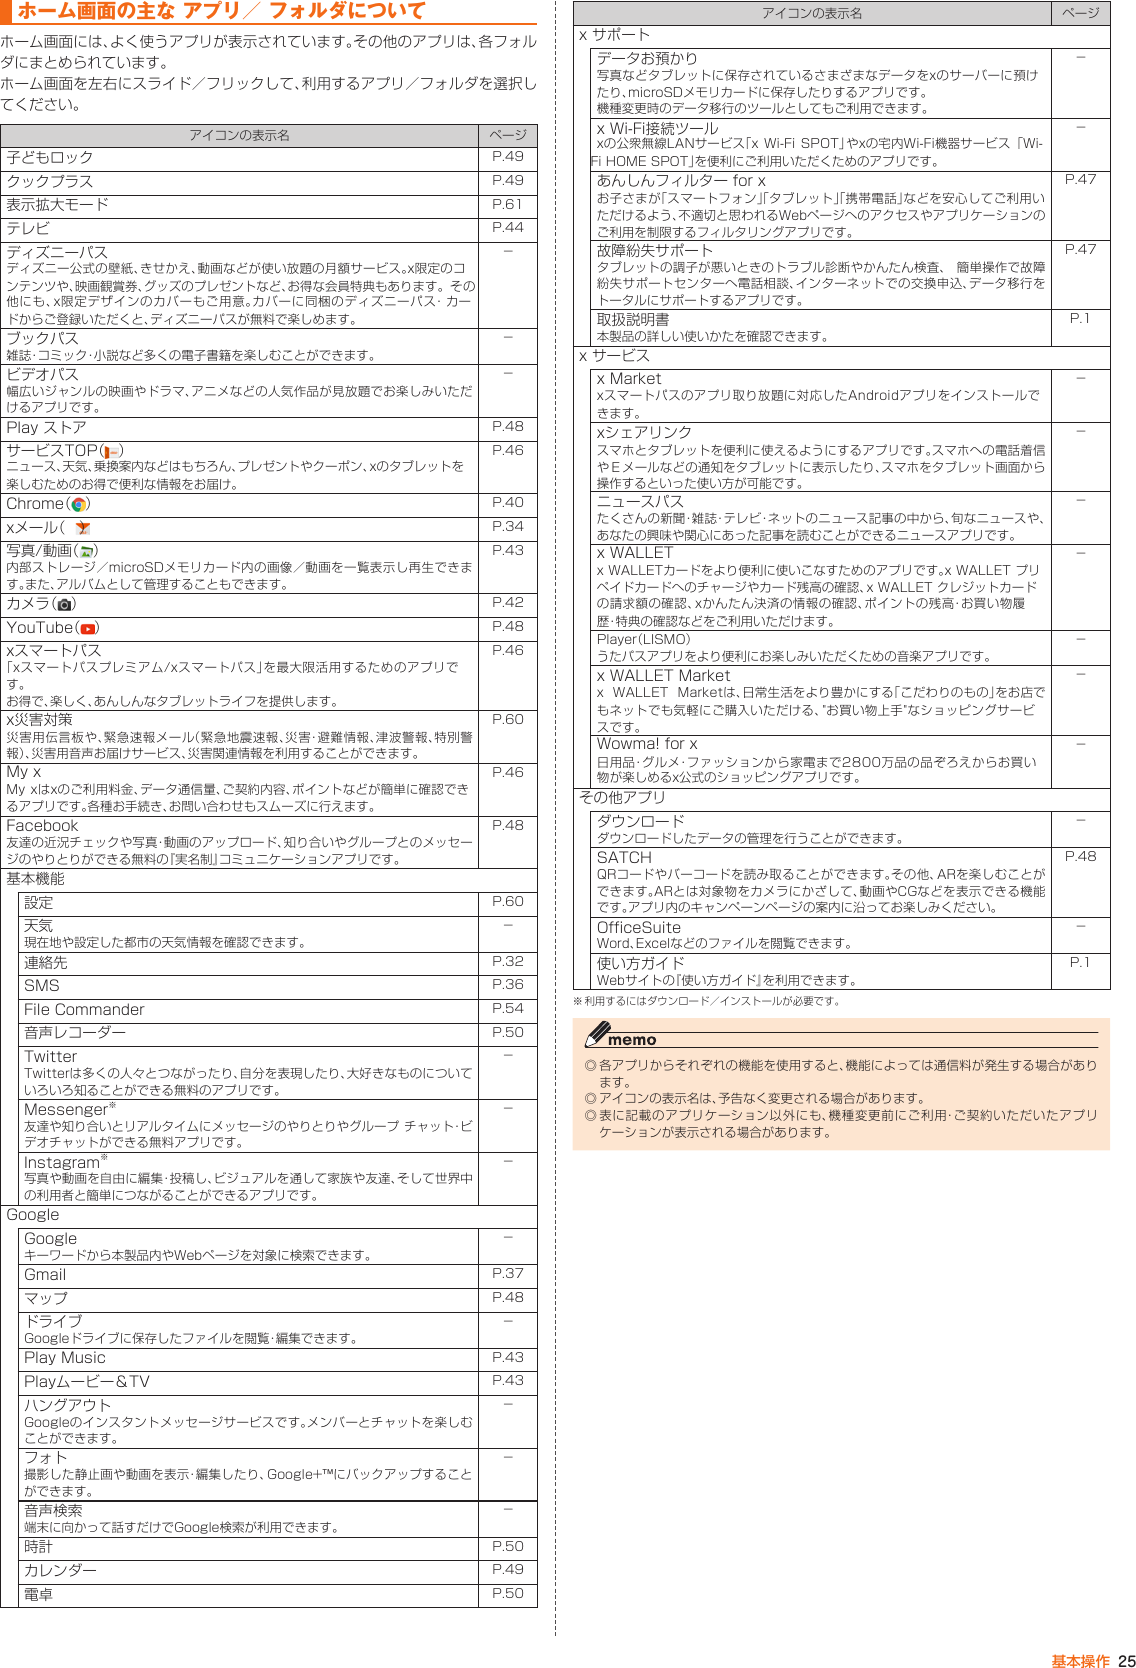 Page 26 of Kyocera FA85 Tablet User Manual 2